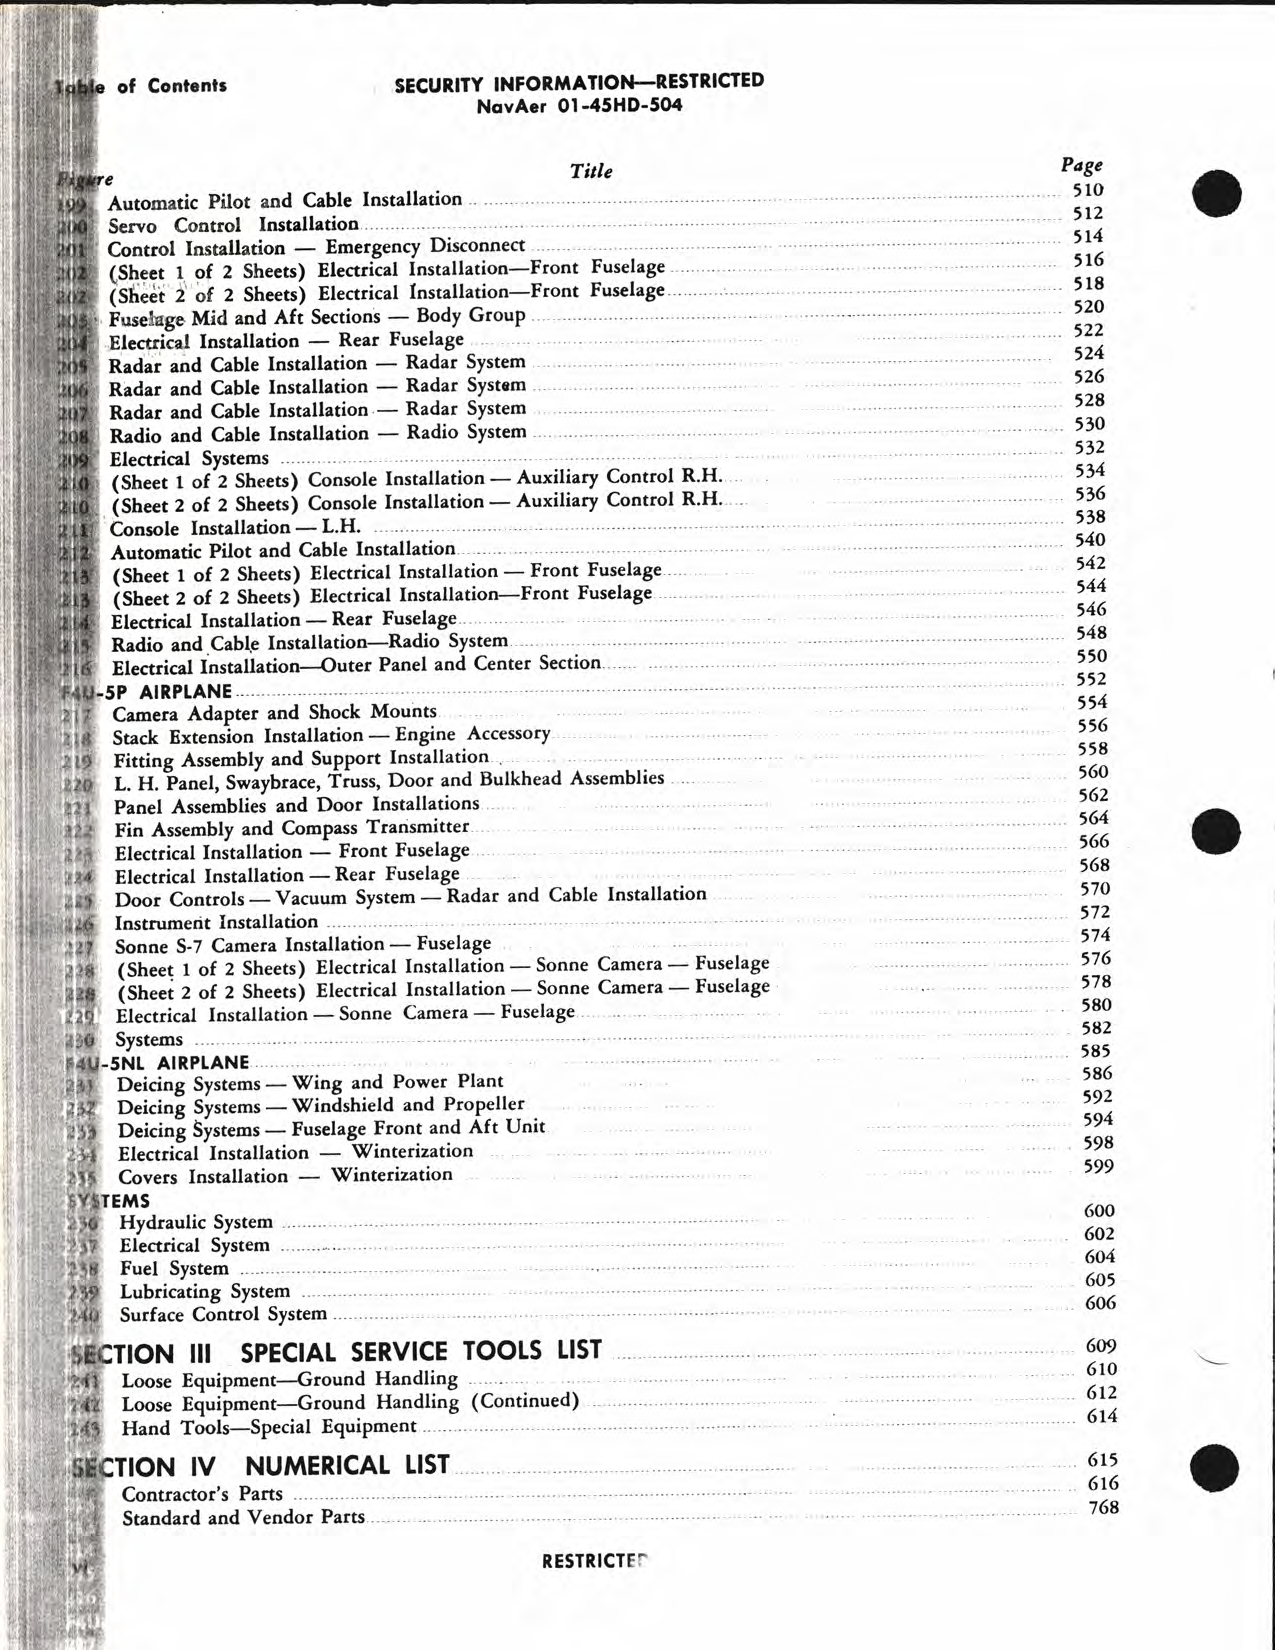 Sample page 8 from AirCorps Library document: Illustrated Maintenance Parts List for F4U-5, -5N, -5NL and -5P Aircraft